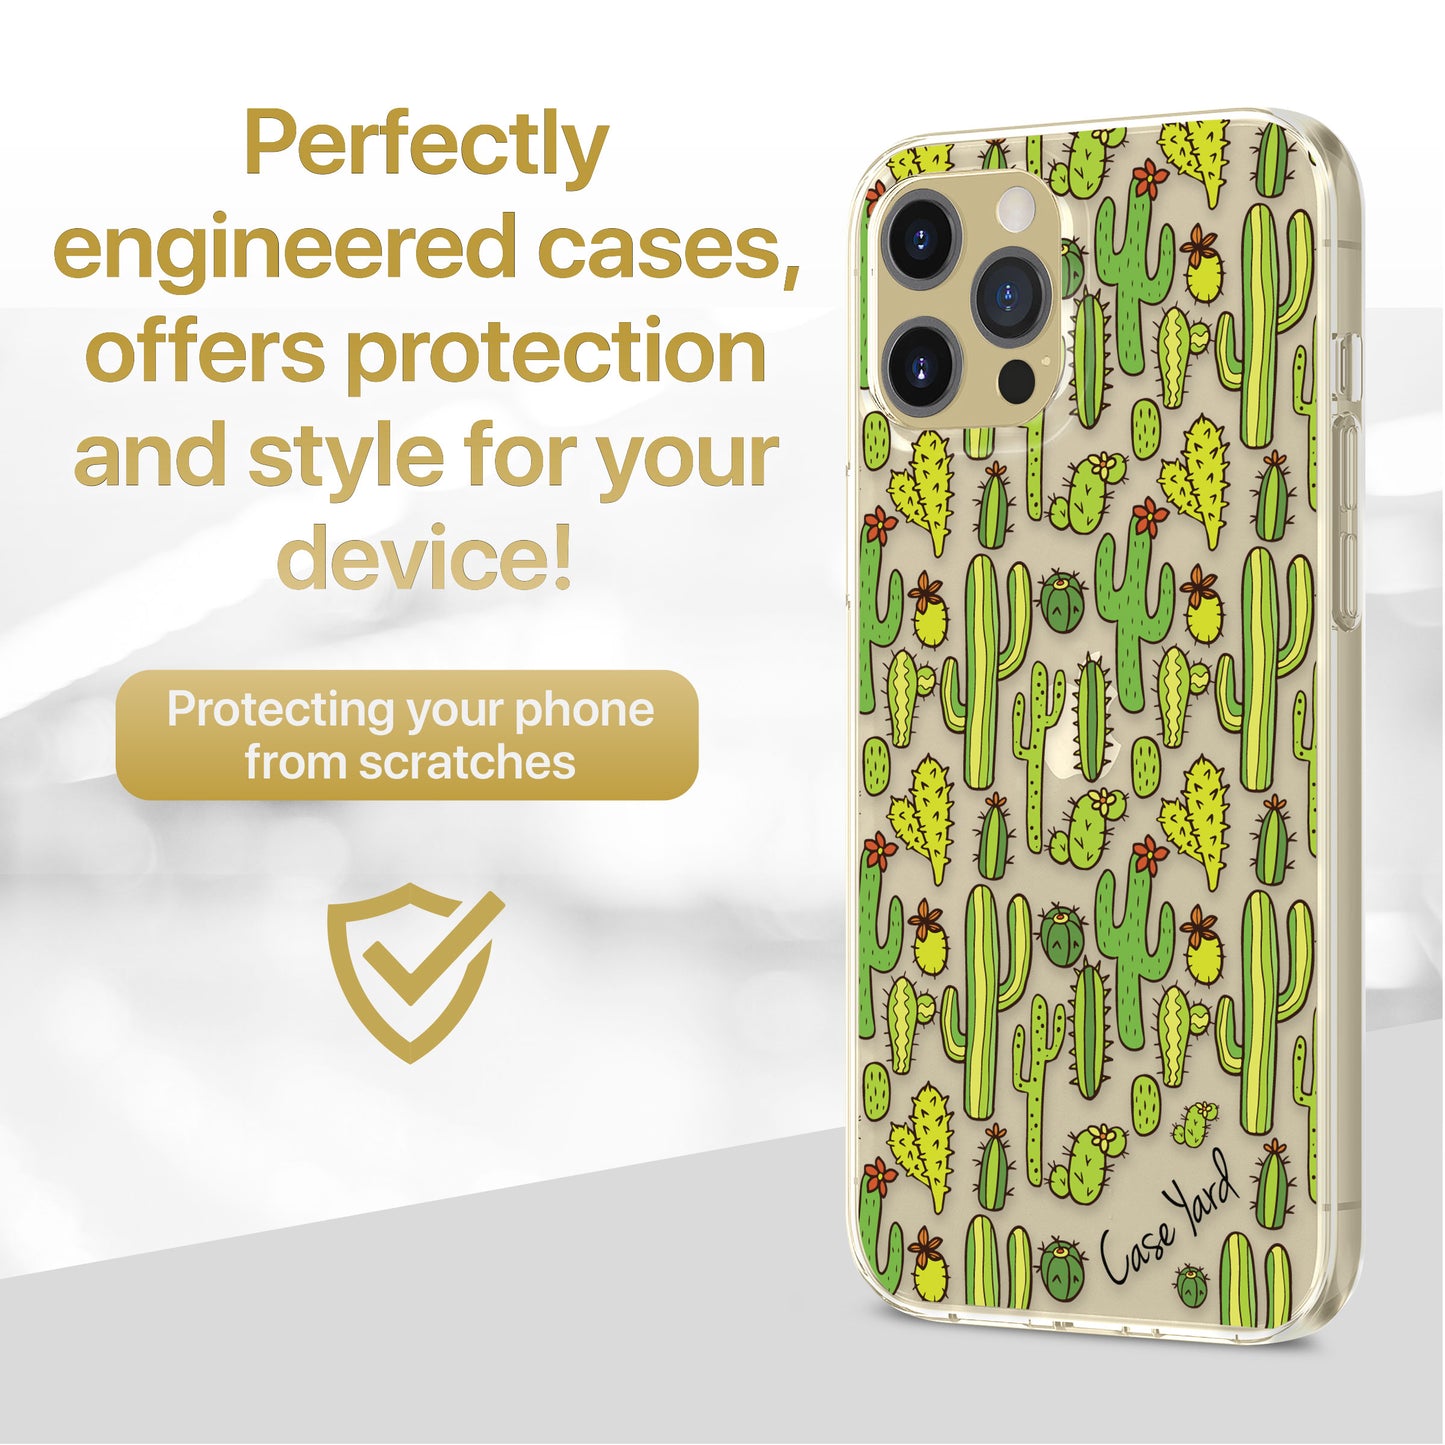 TPU Case Clear case with (Cactus) Design for iPhone & Samsung Phones